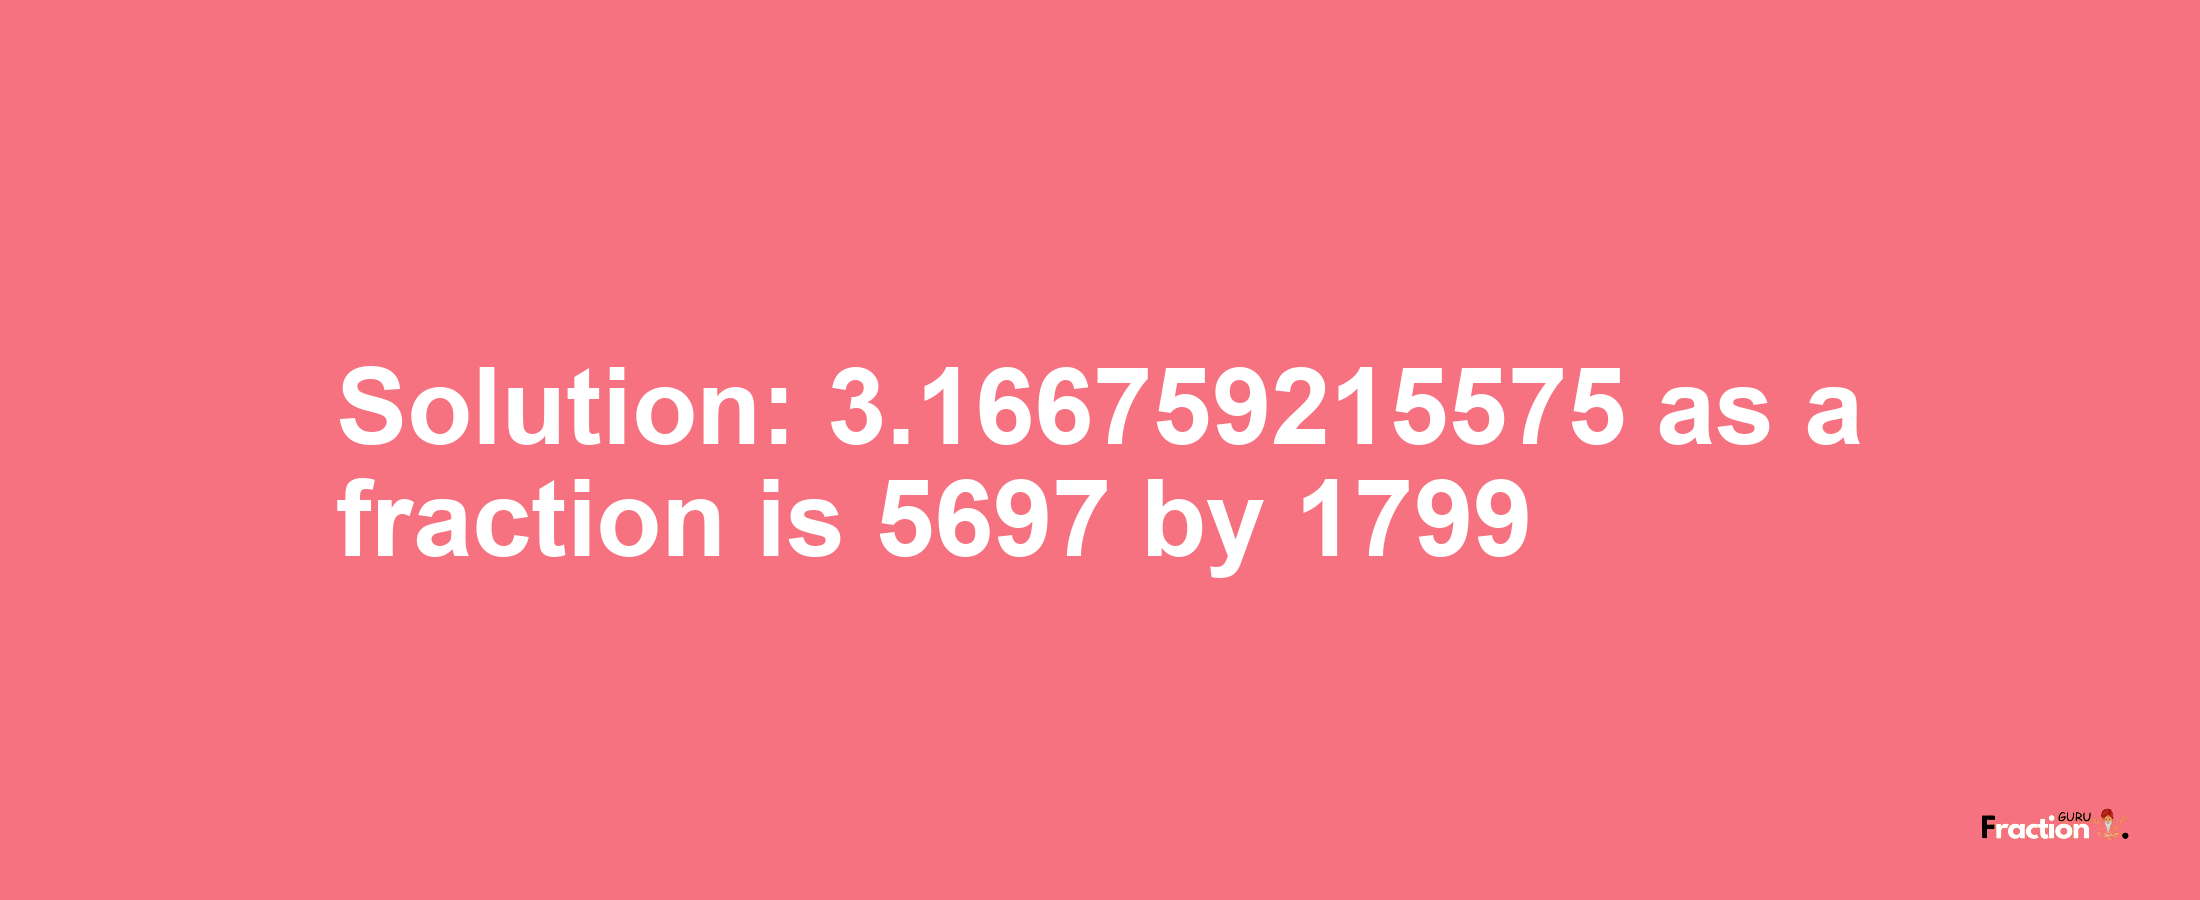 Solution:3.166759215575 as a fraction is 5697/1799